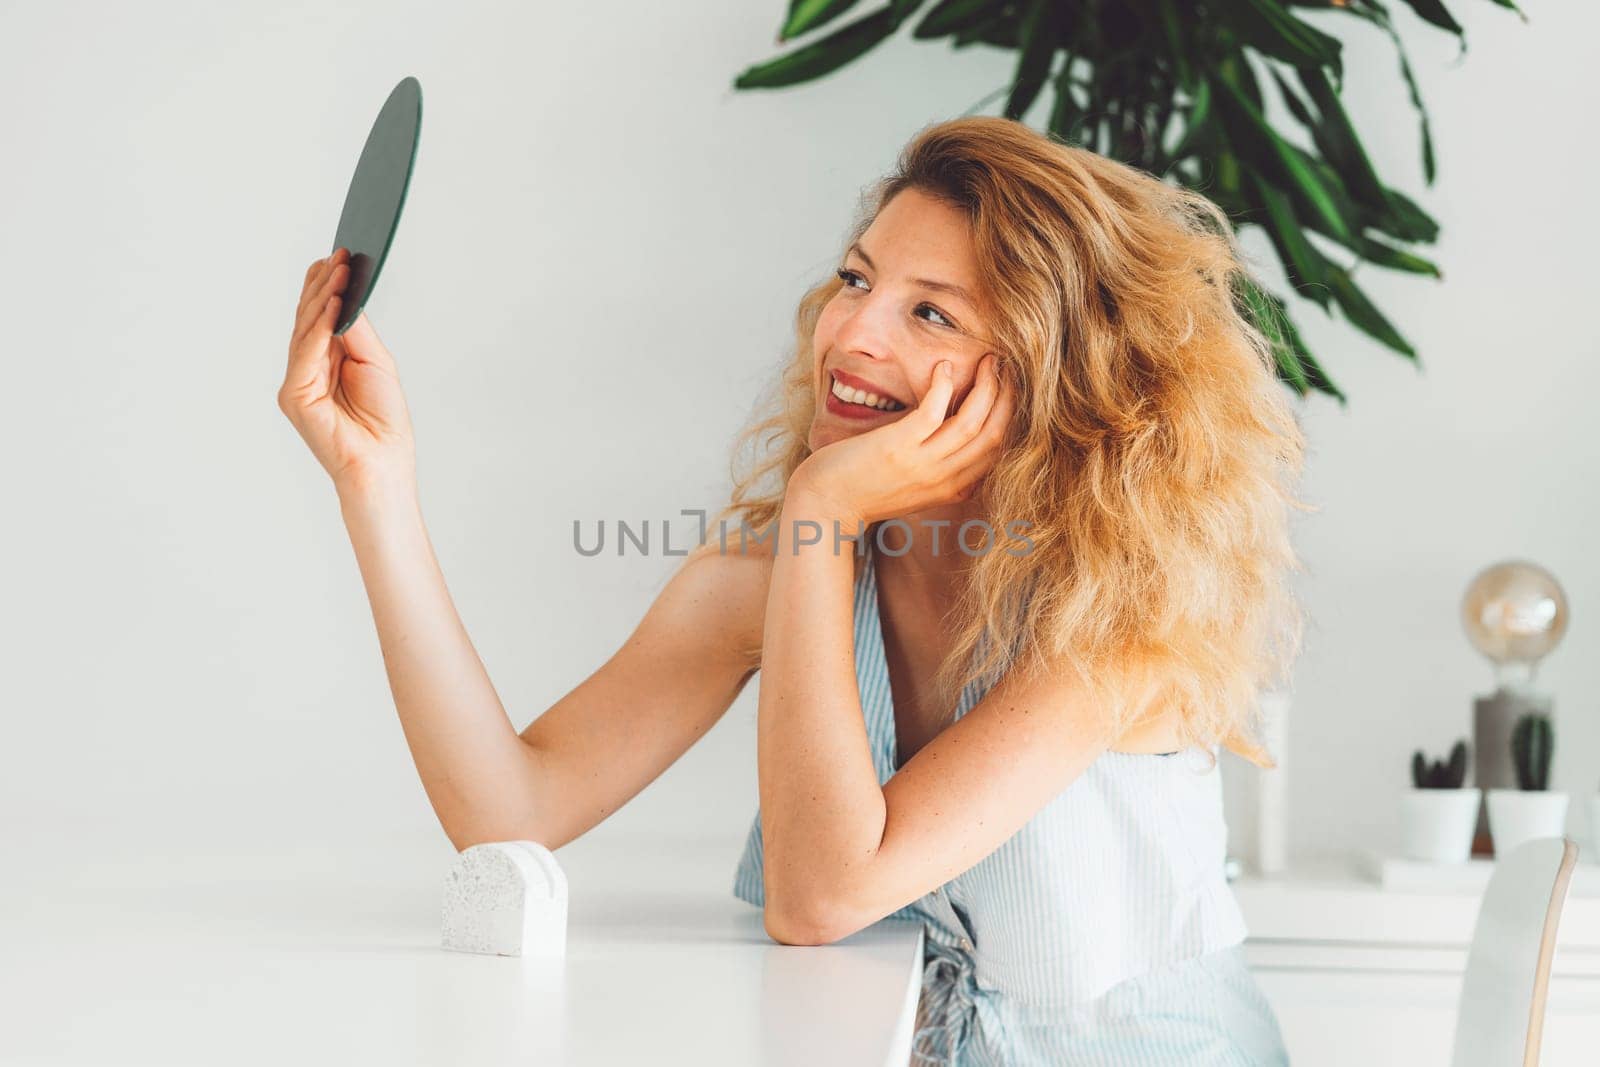 Smiling blonde woman with curly hair looking at herself in a small round mirror she is holding up by VisualProductions